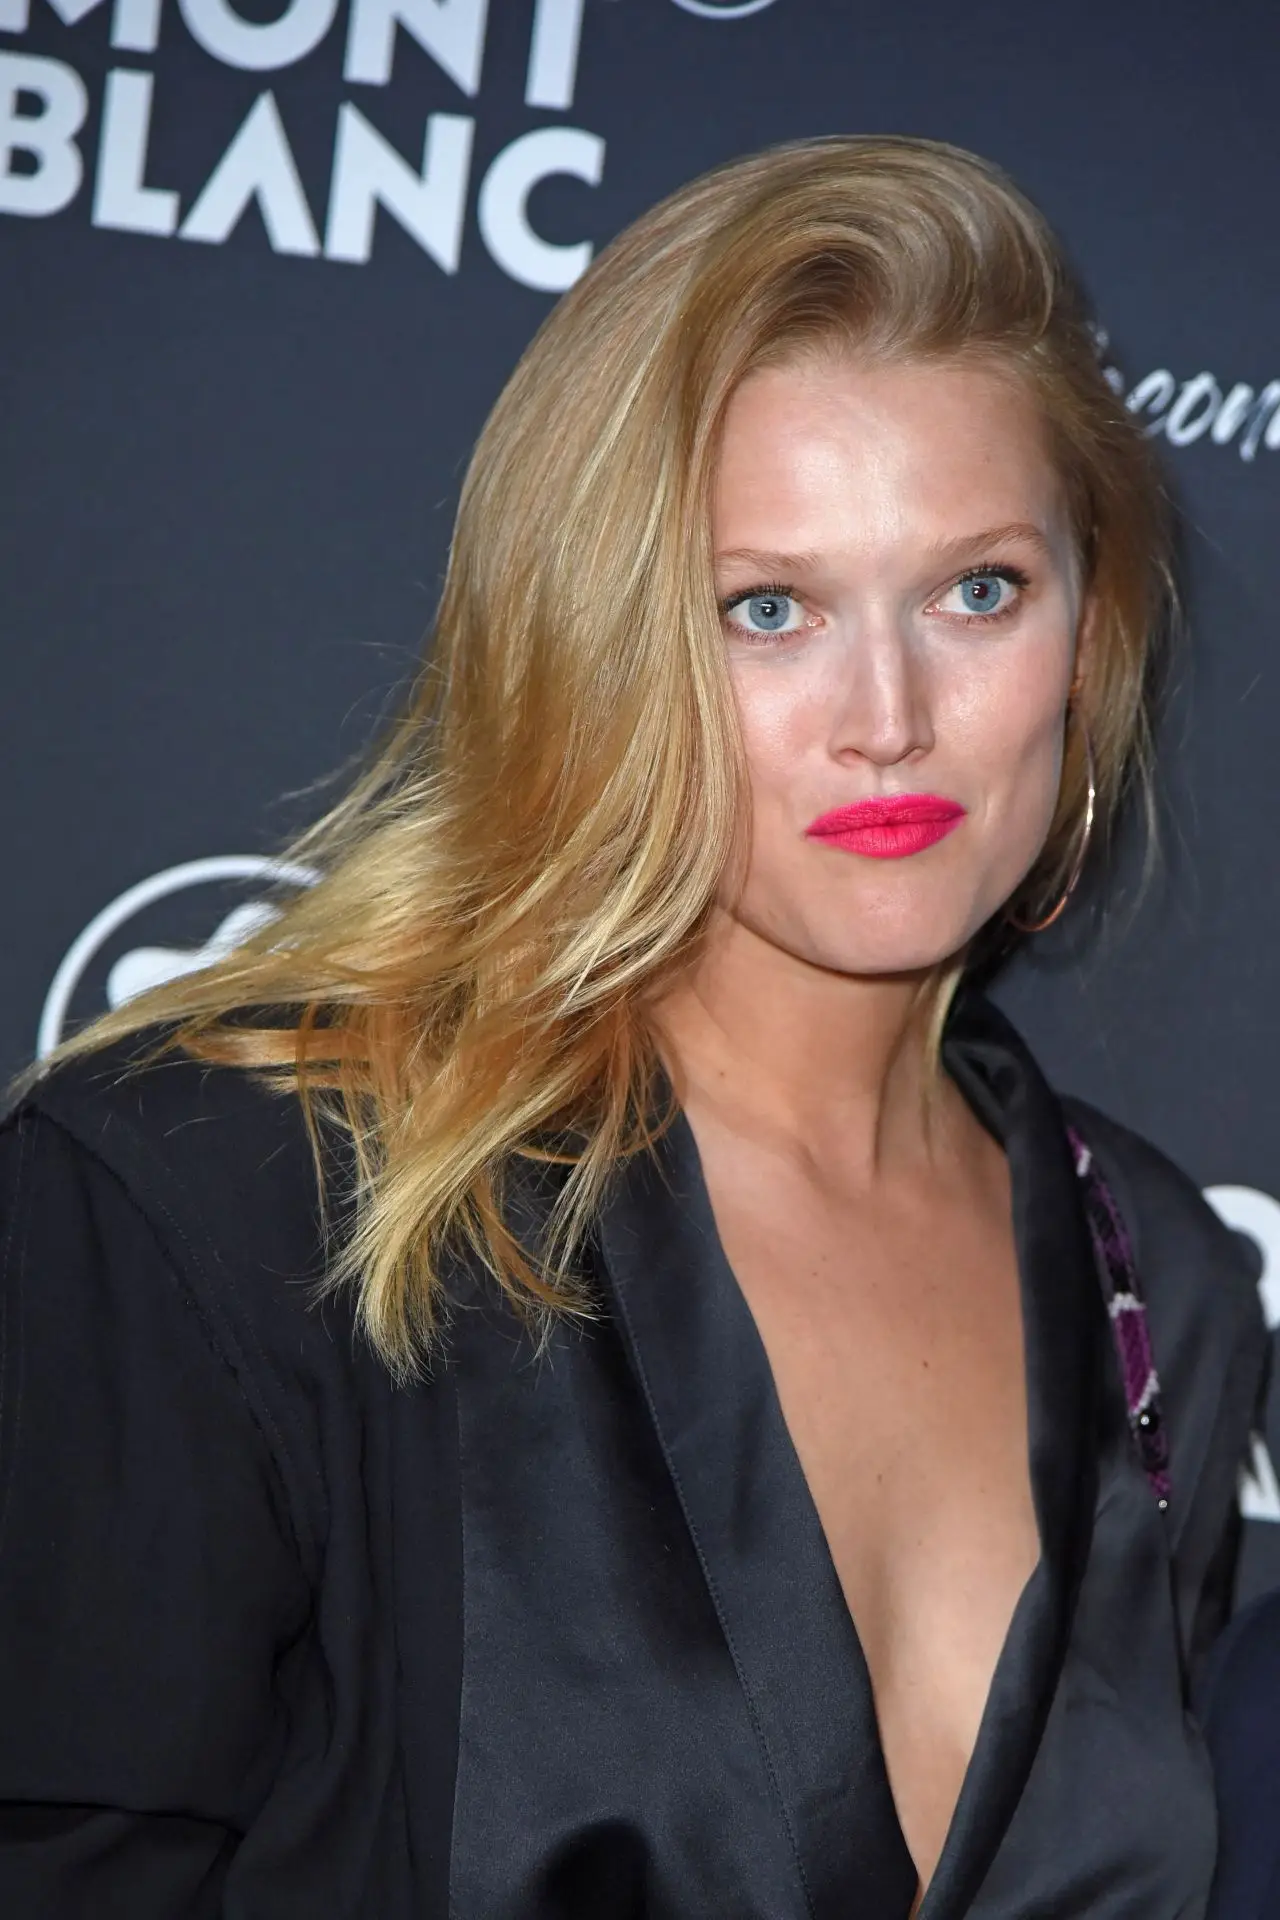 TONI GARRN STILLS AT MONTBLANC RECONNECT 2 THE WORLD PARTY IN BERLIN2